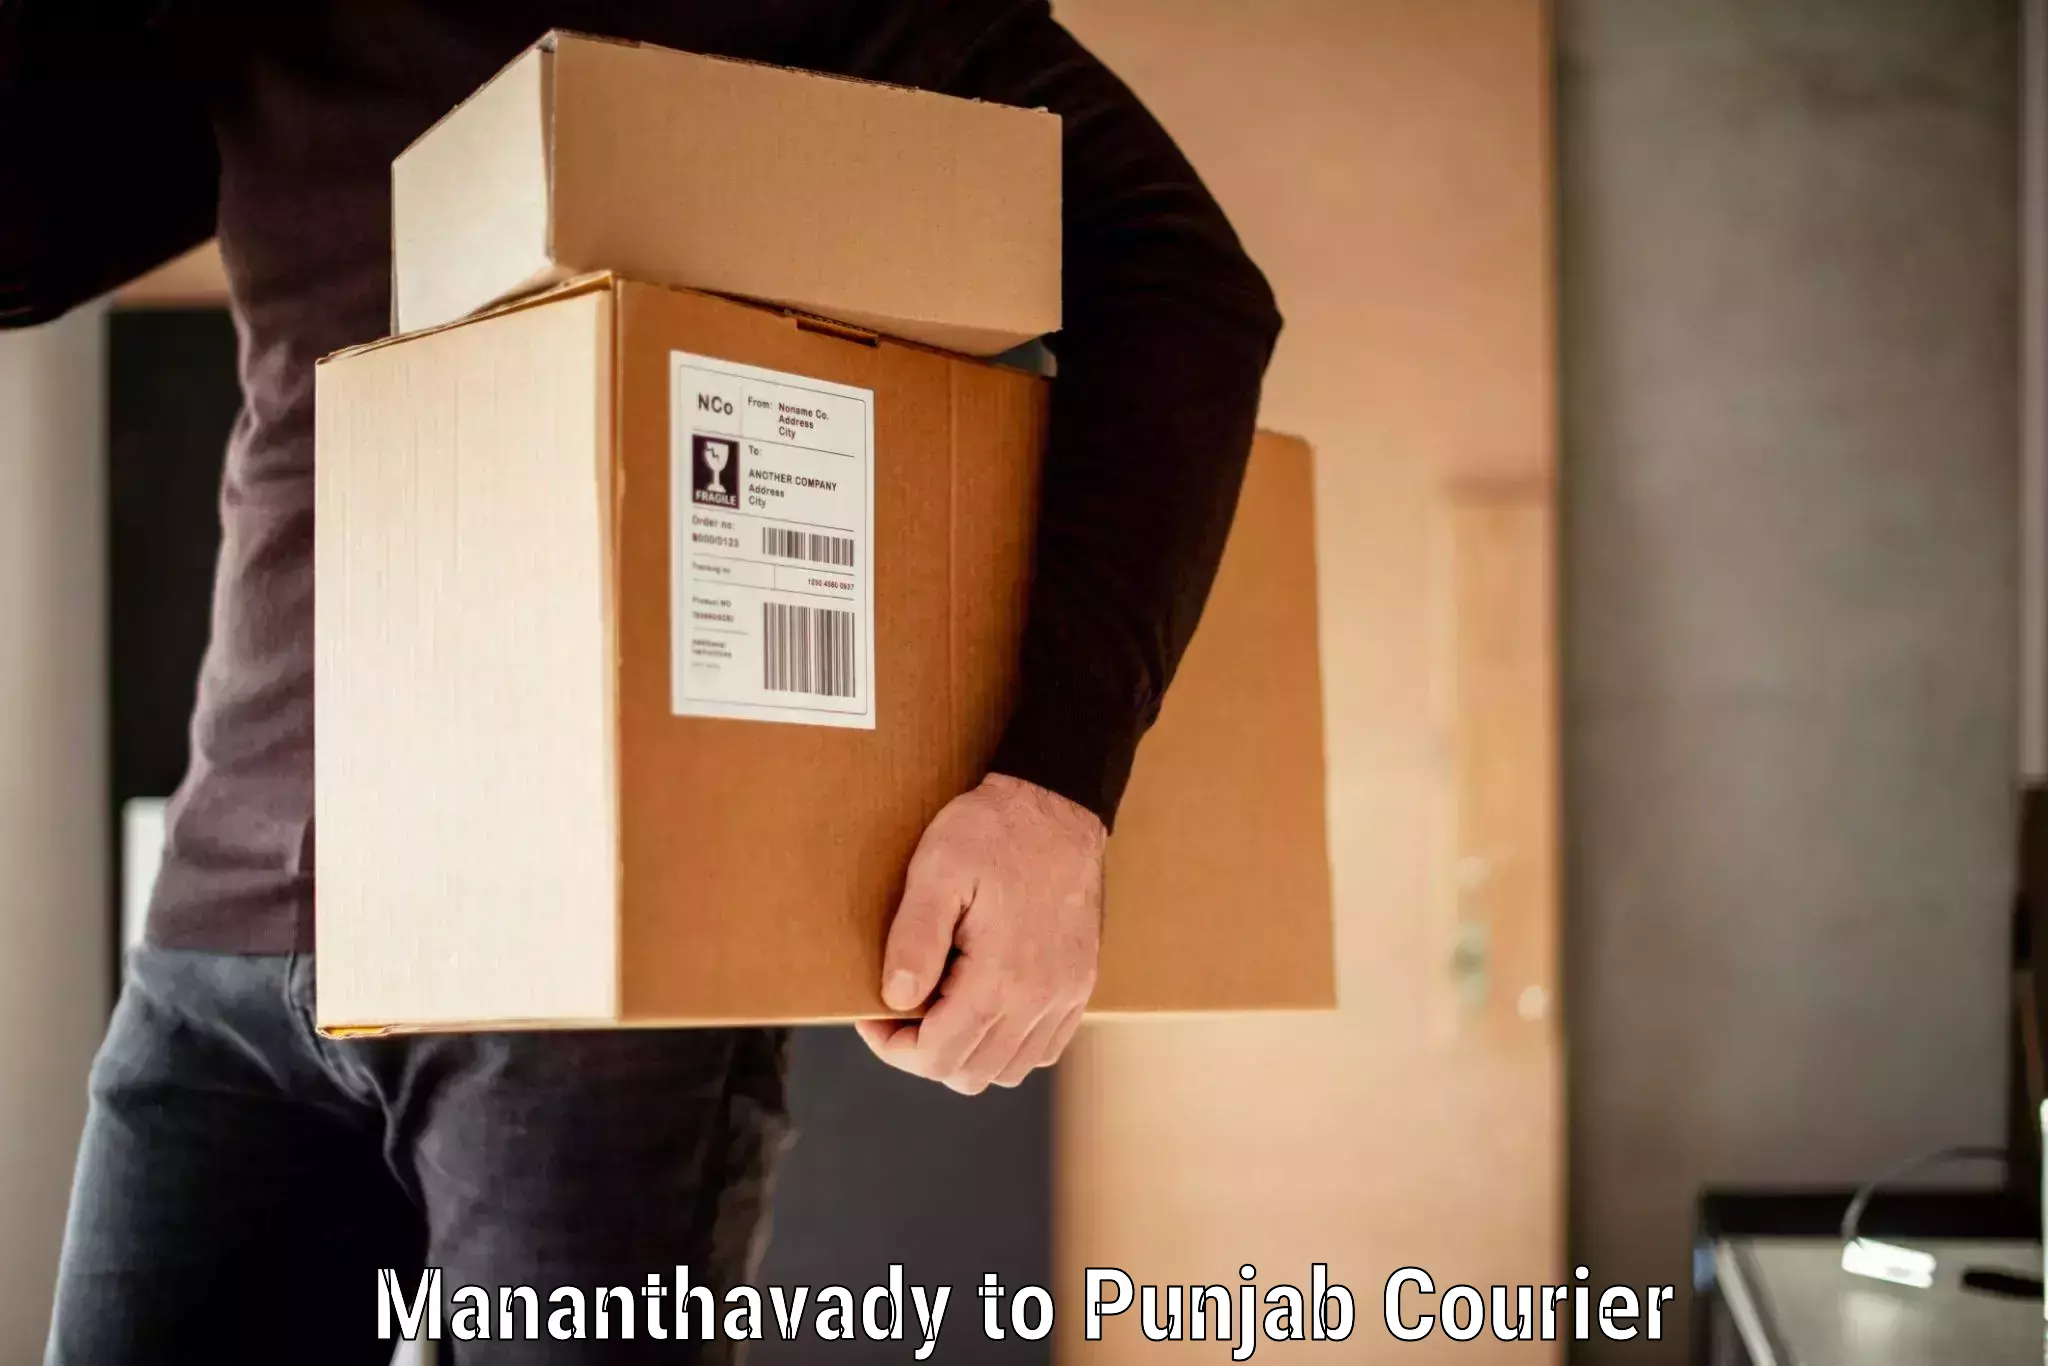 Baggage transport professionals Mananthavady to Ludhiana